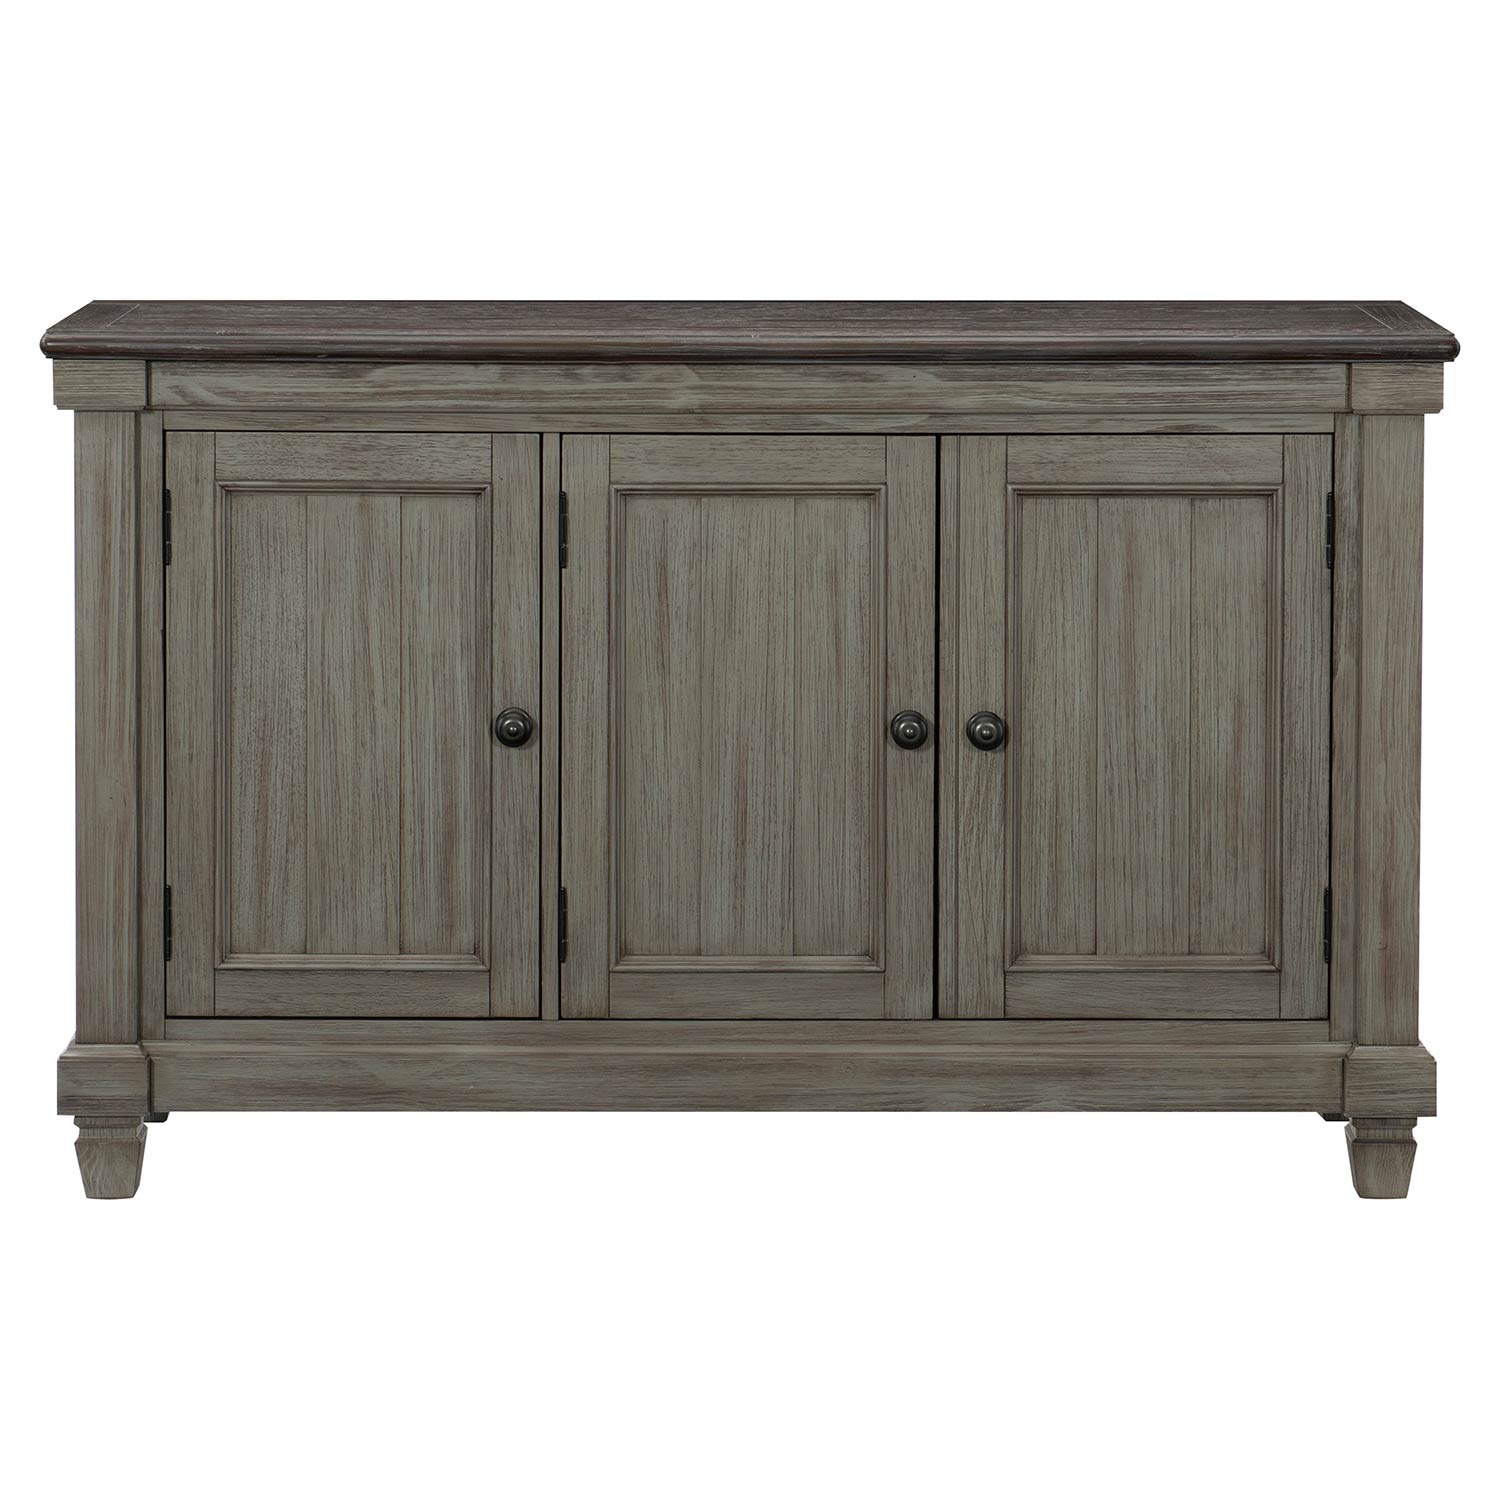 Homelegance Granby Server - Antique Gray and Coffee